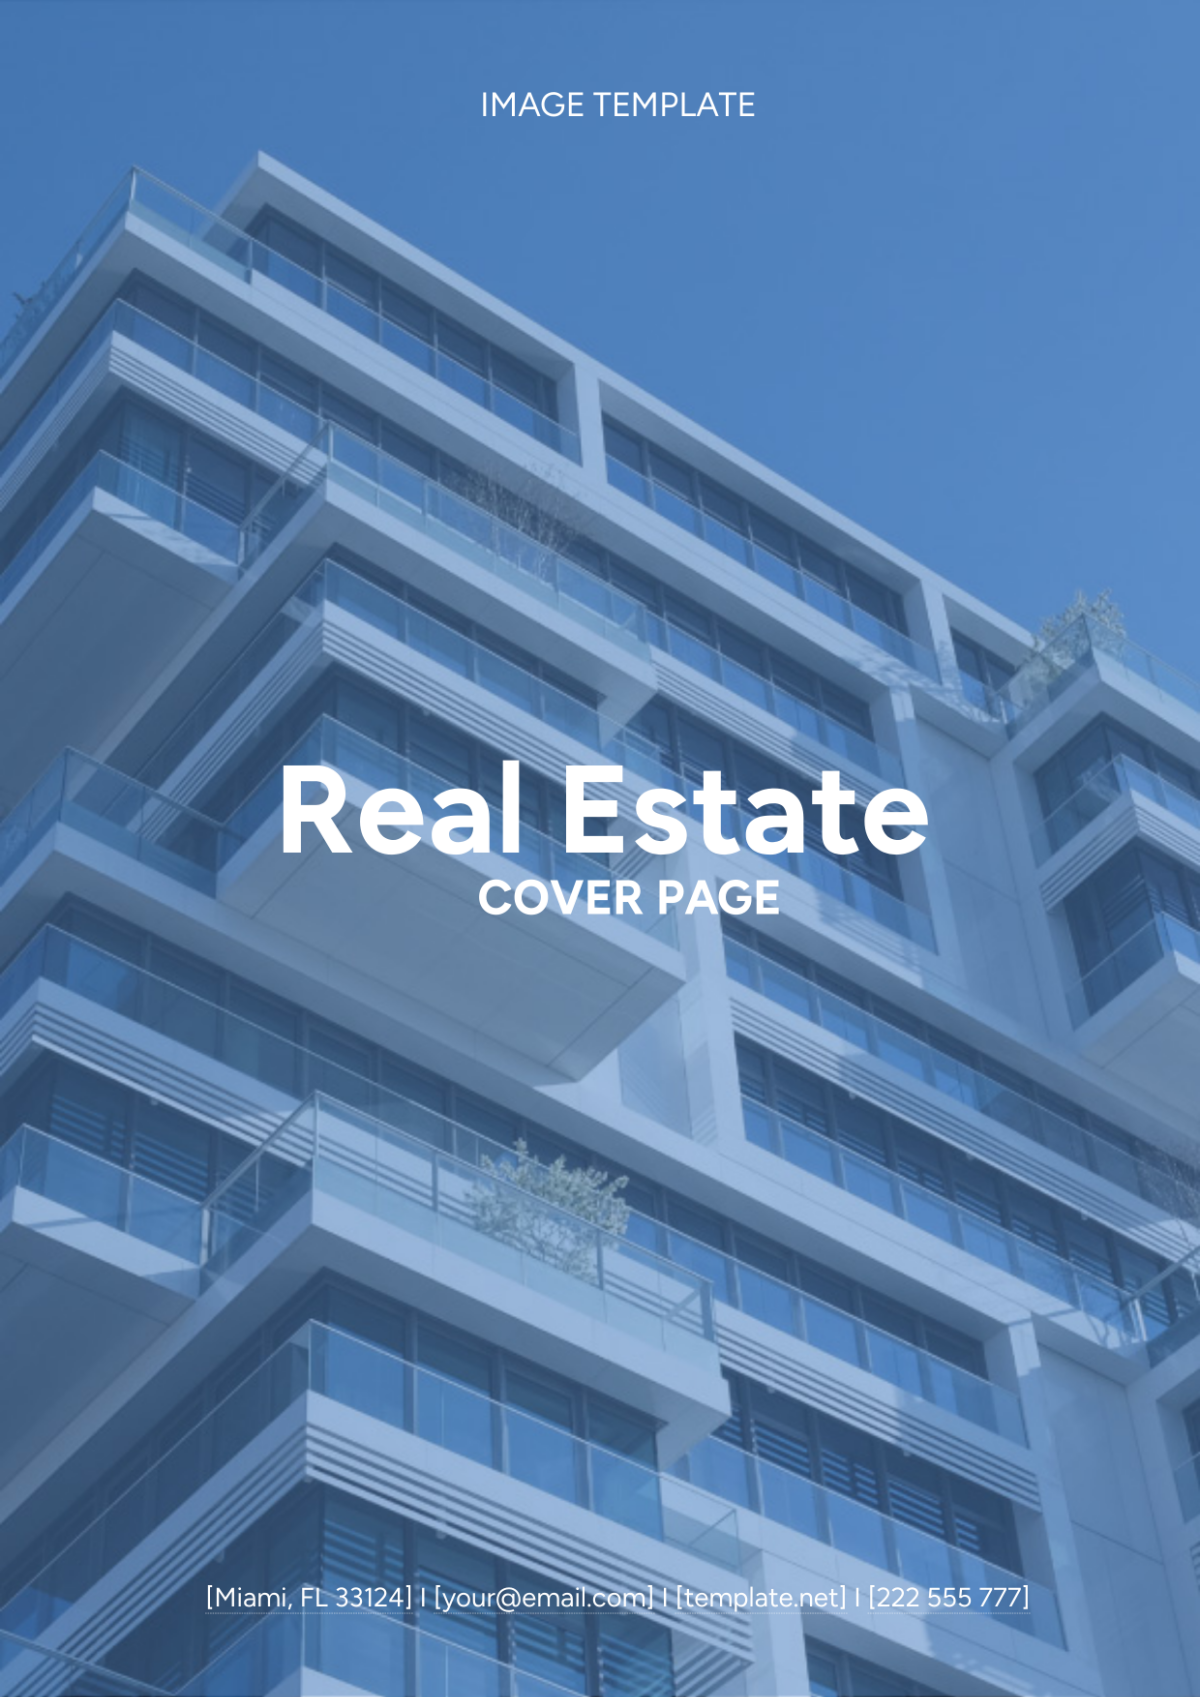 Real Estate Cover Page Image Template